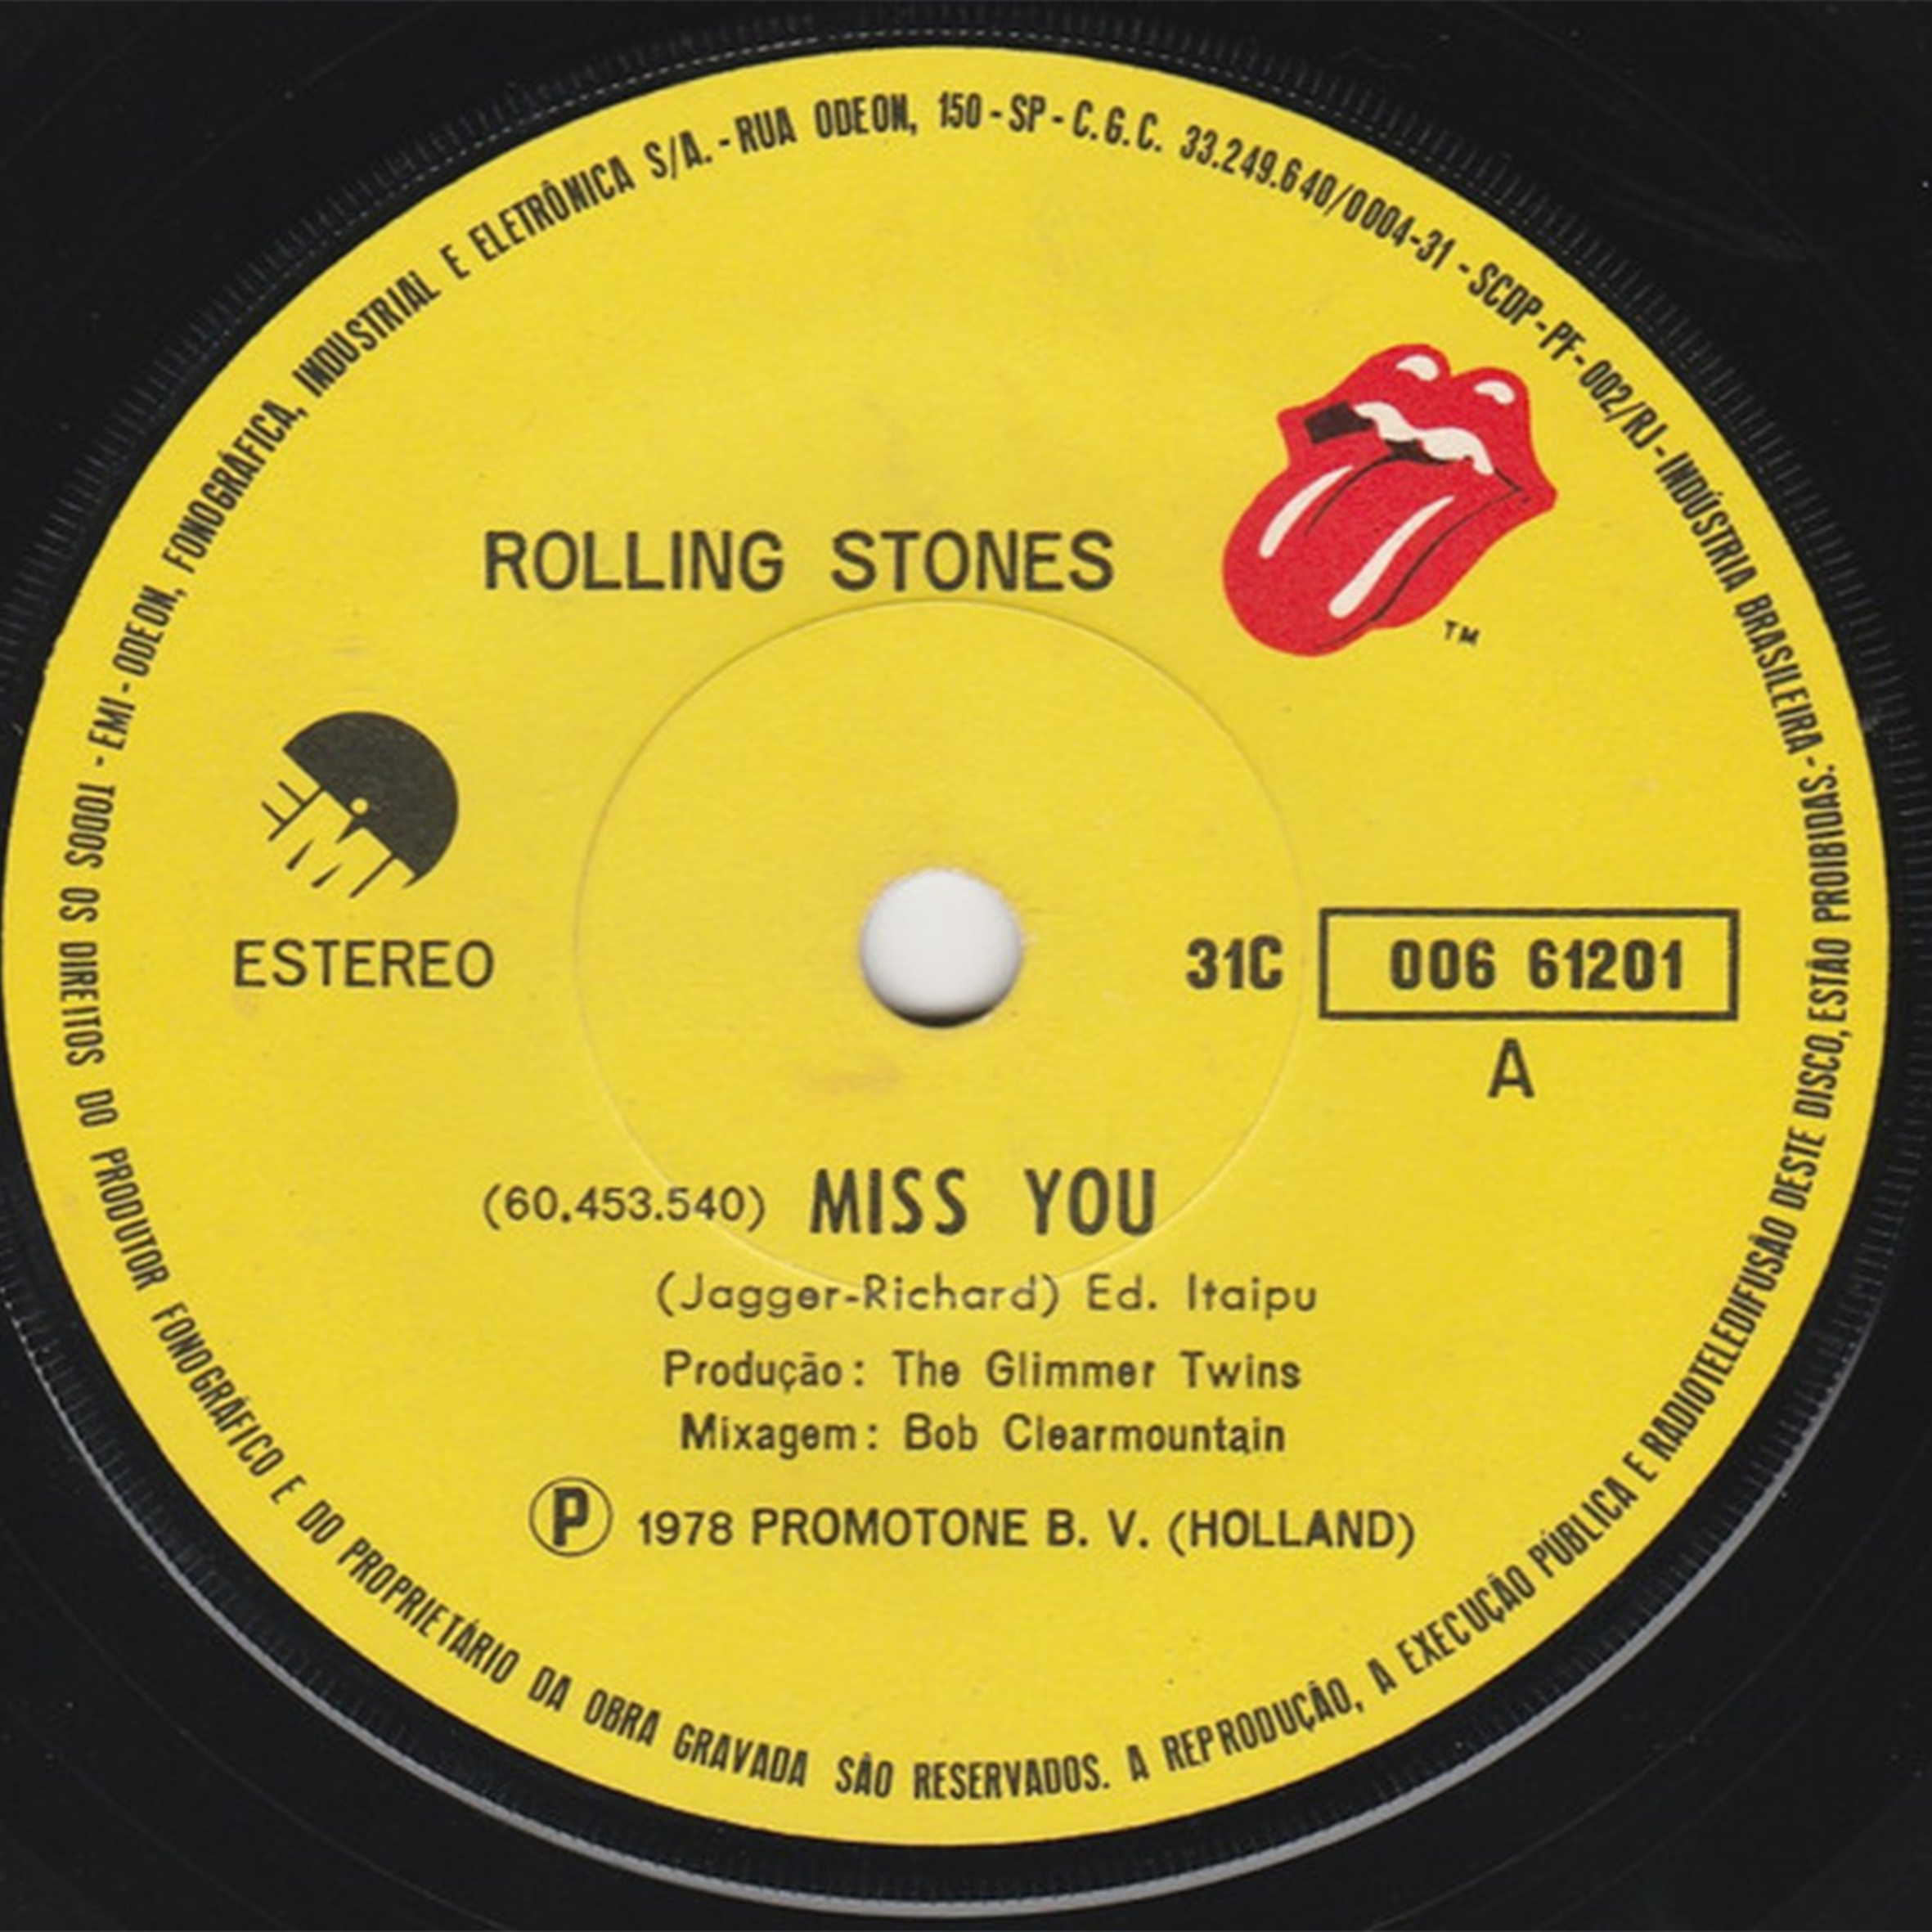 Vinil Compacto - Rolling Stones - Miss You